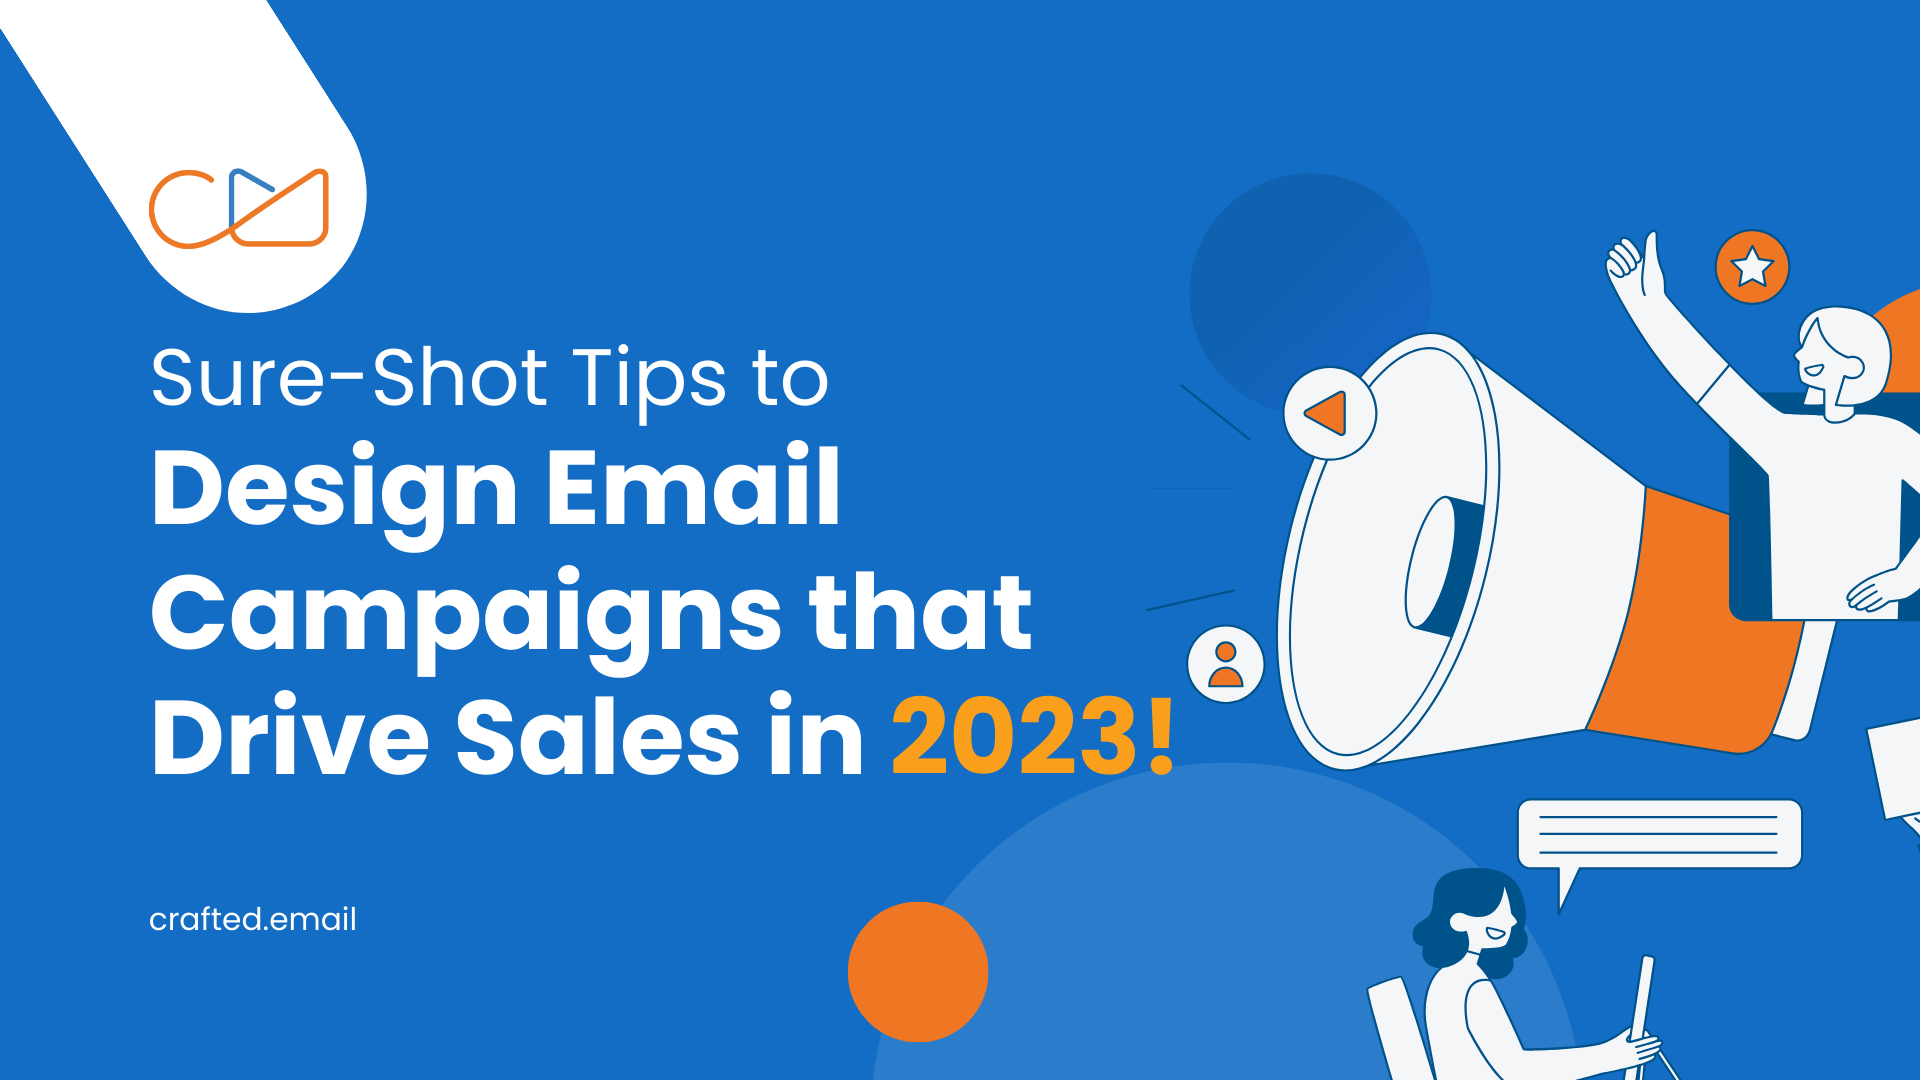 Sure-Shot Tips to Design Email Campaigns that Drive Sales in 2023!